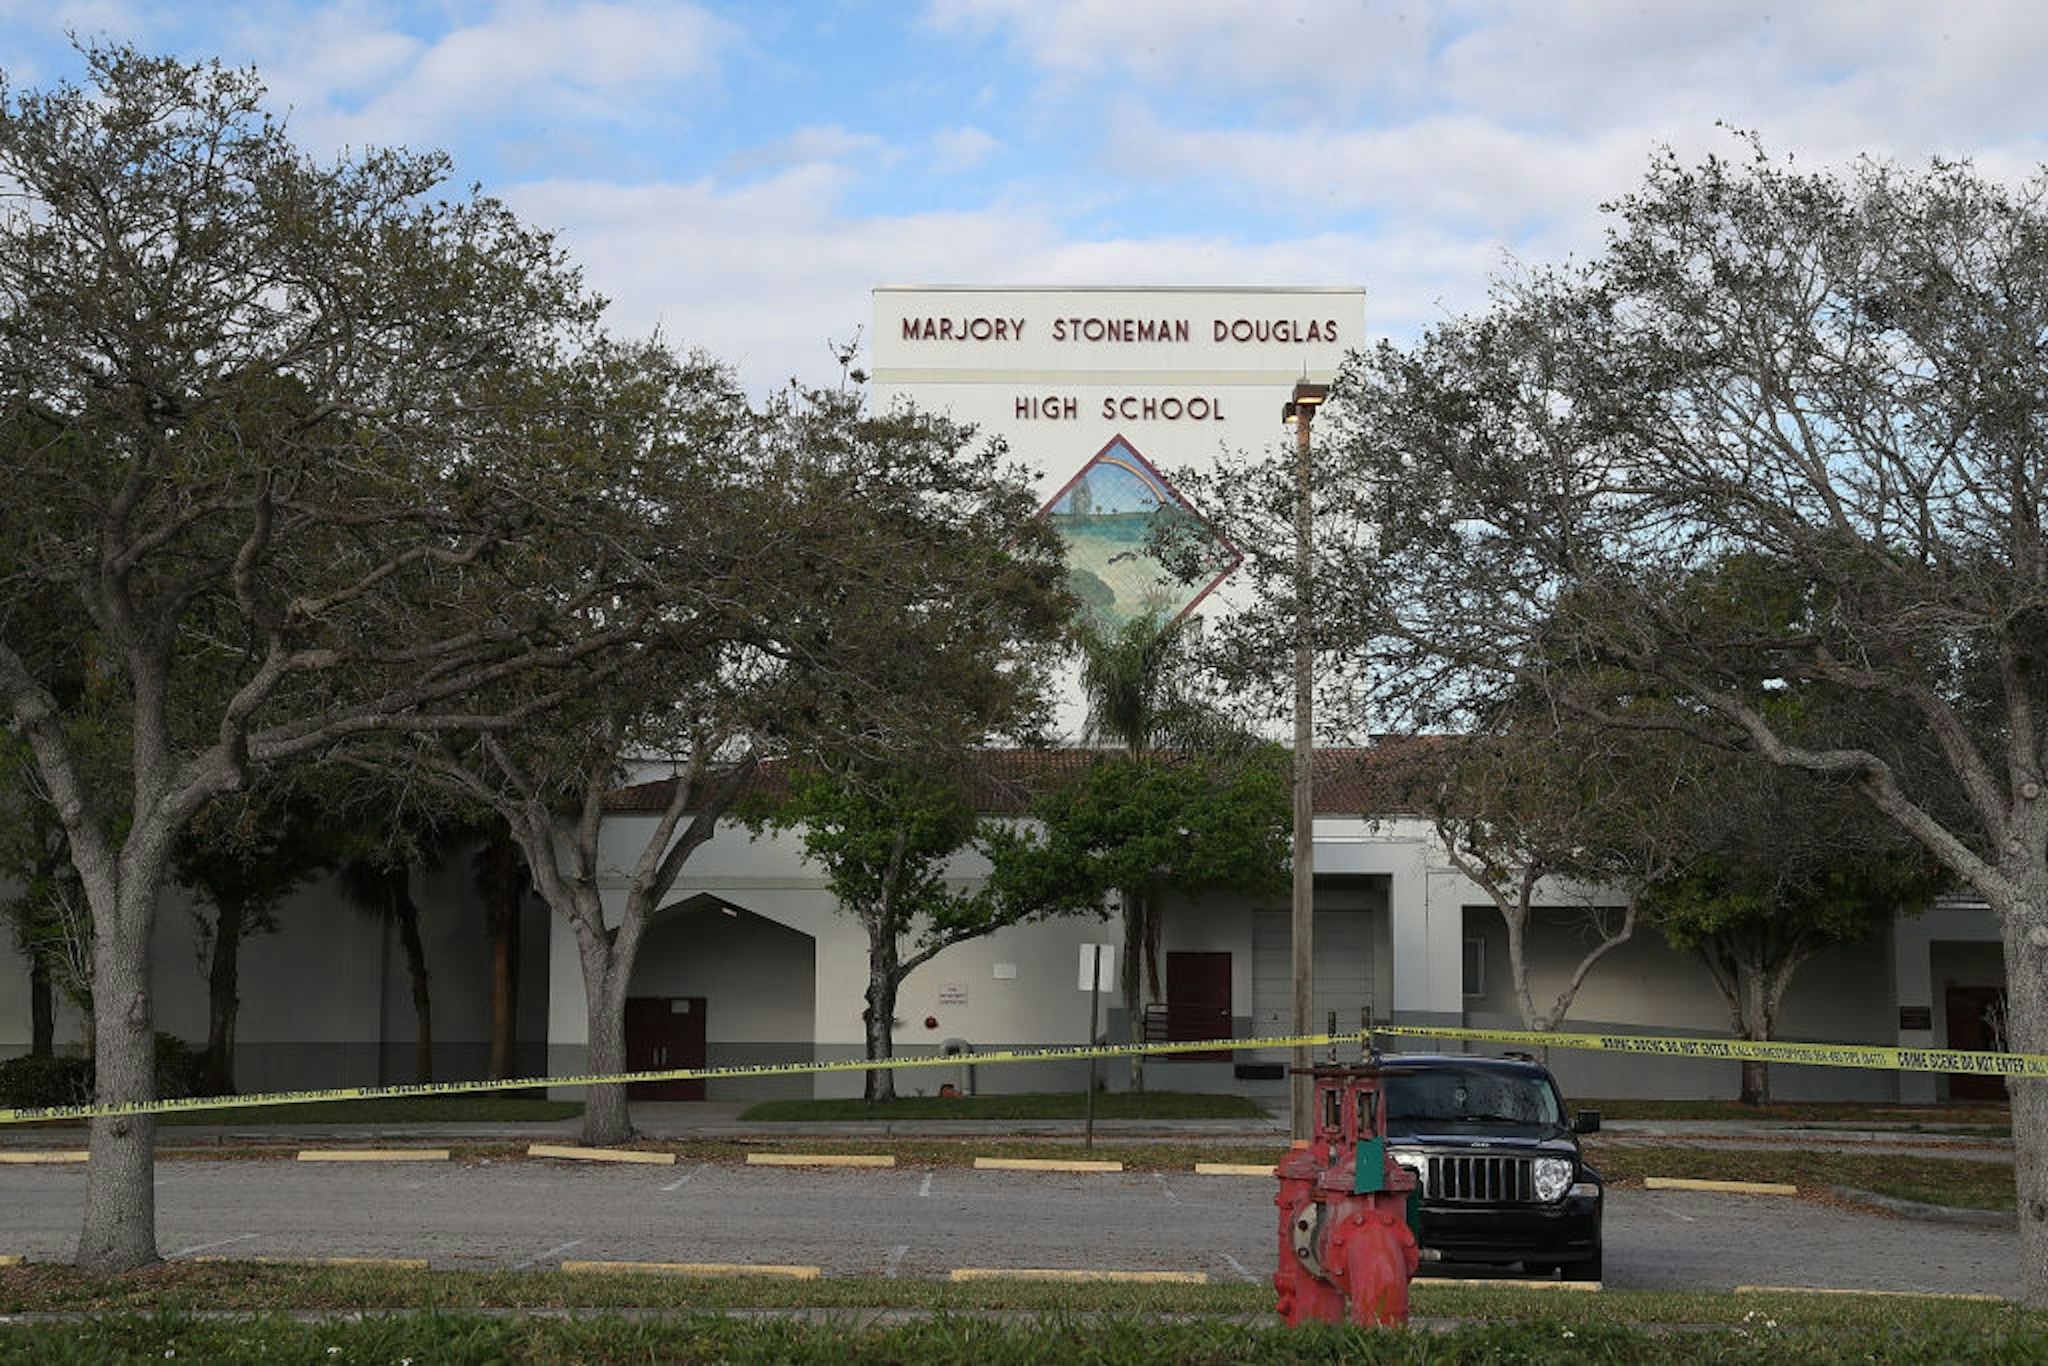 PARKLAND, FL - FEBRUARY 18: The front of Marjory Stoneman Douglas High School is seen on February 18, 2018 in Parkland, Florida. Police arrested 19 year old former student Nikolas Cruz for the mass shooting that killed 17 people on February 14.